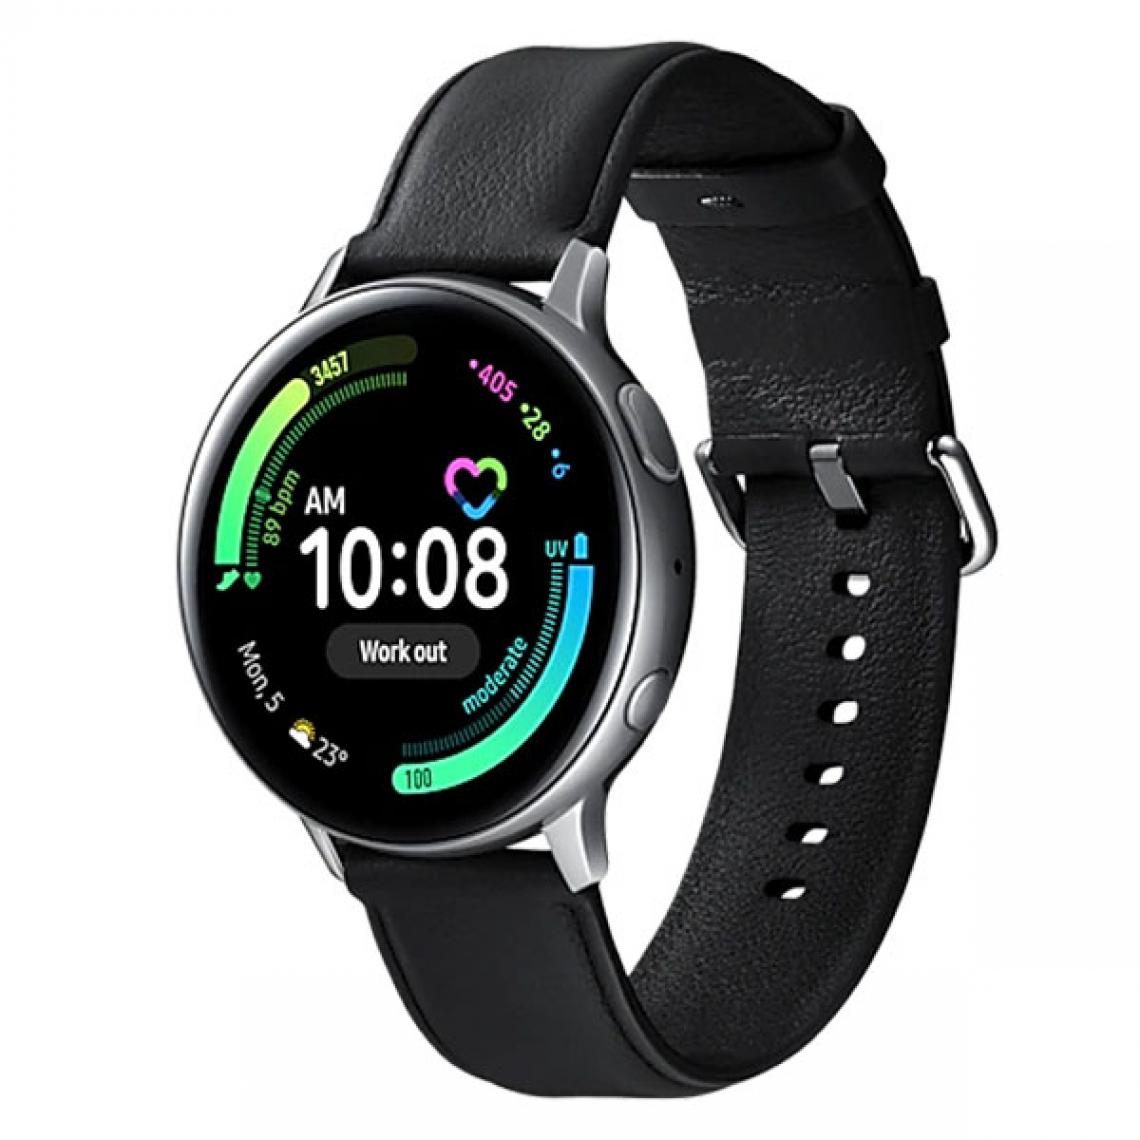 Samsung - Samsung Galaxy Watch Active 2 44mm Argent (Stainless Silver) R820 - Montre connectée